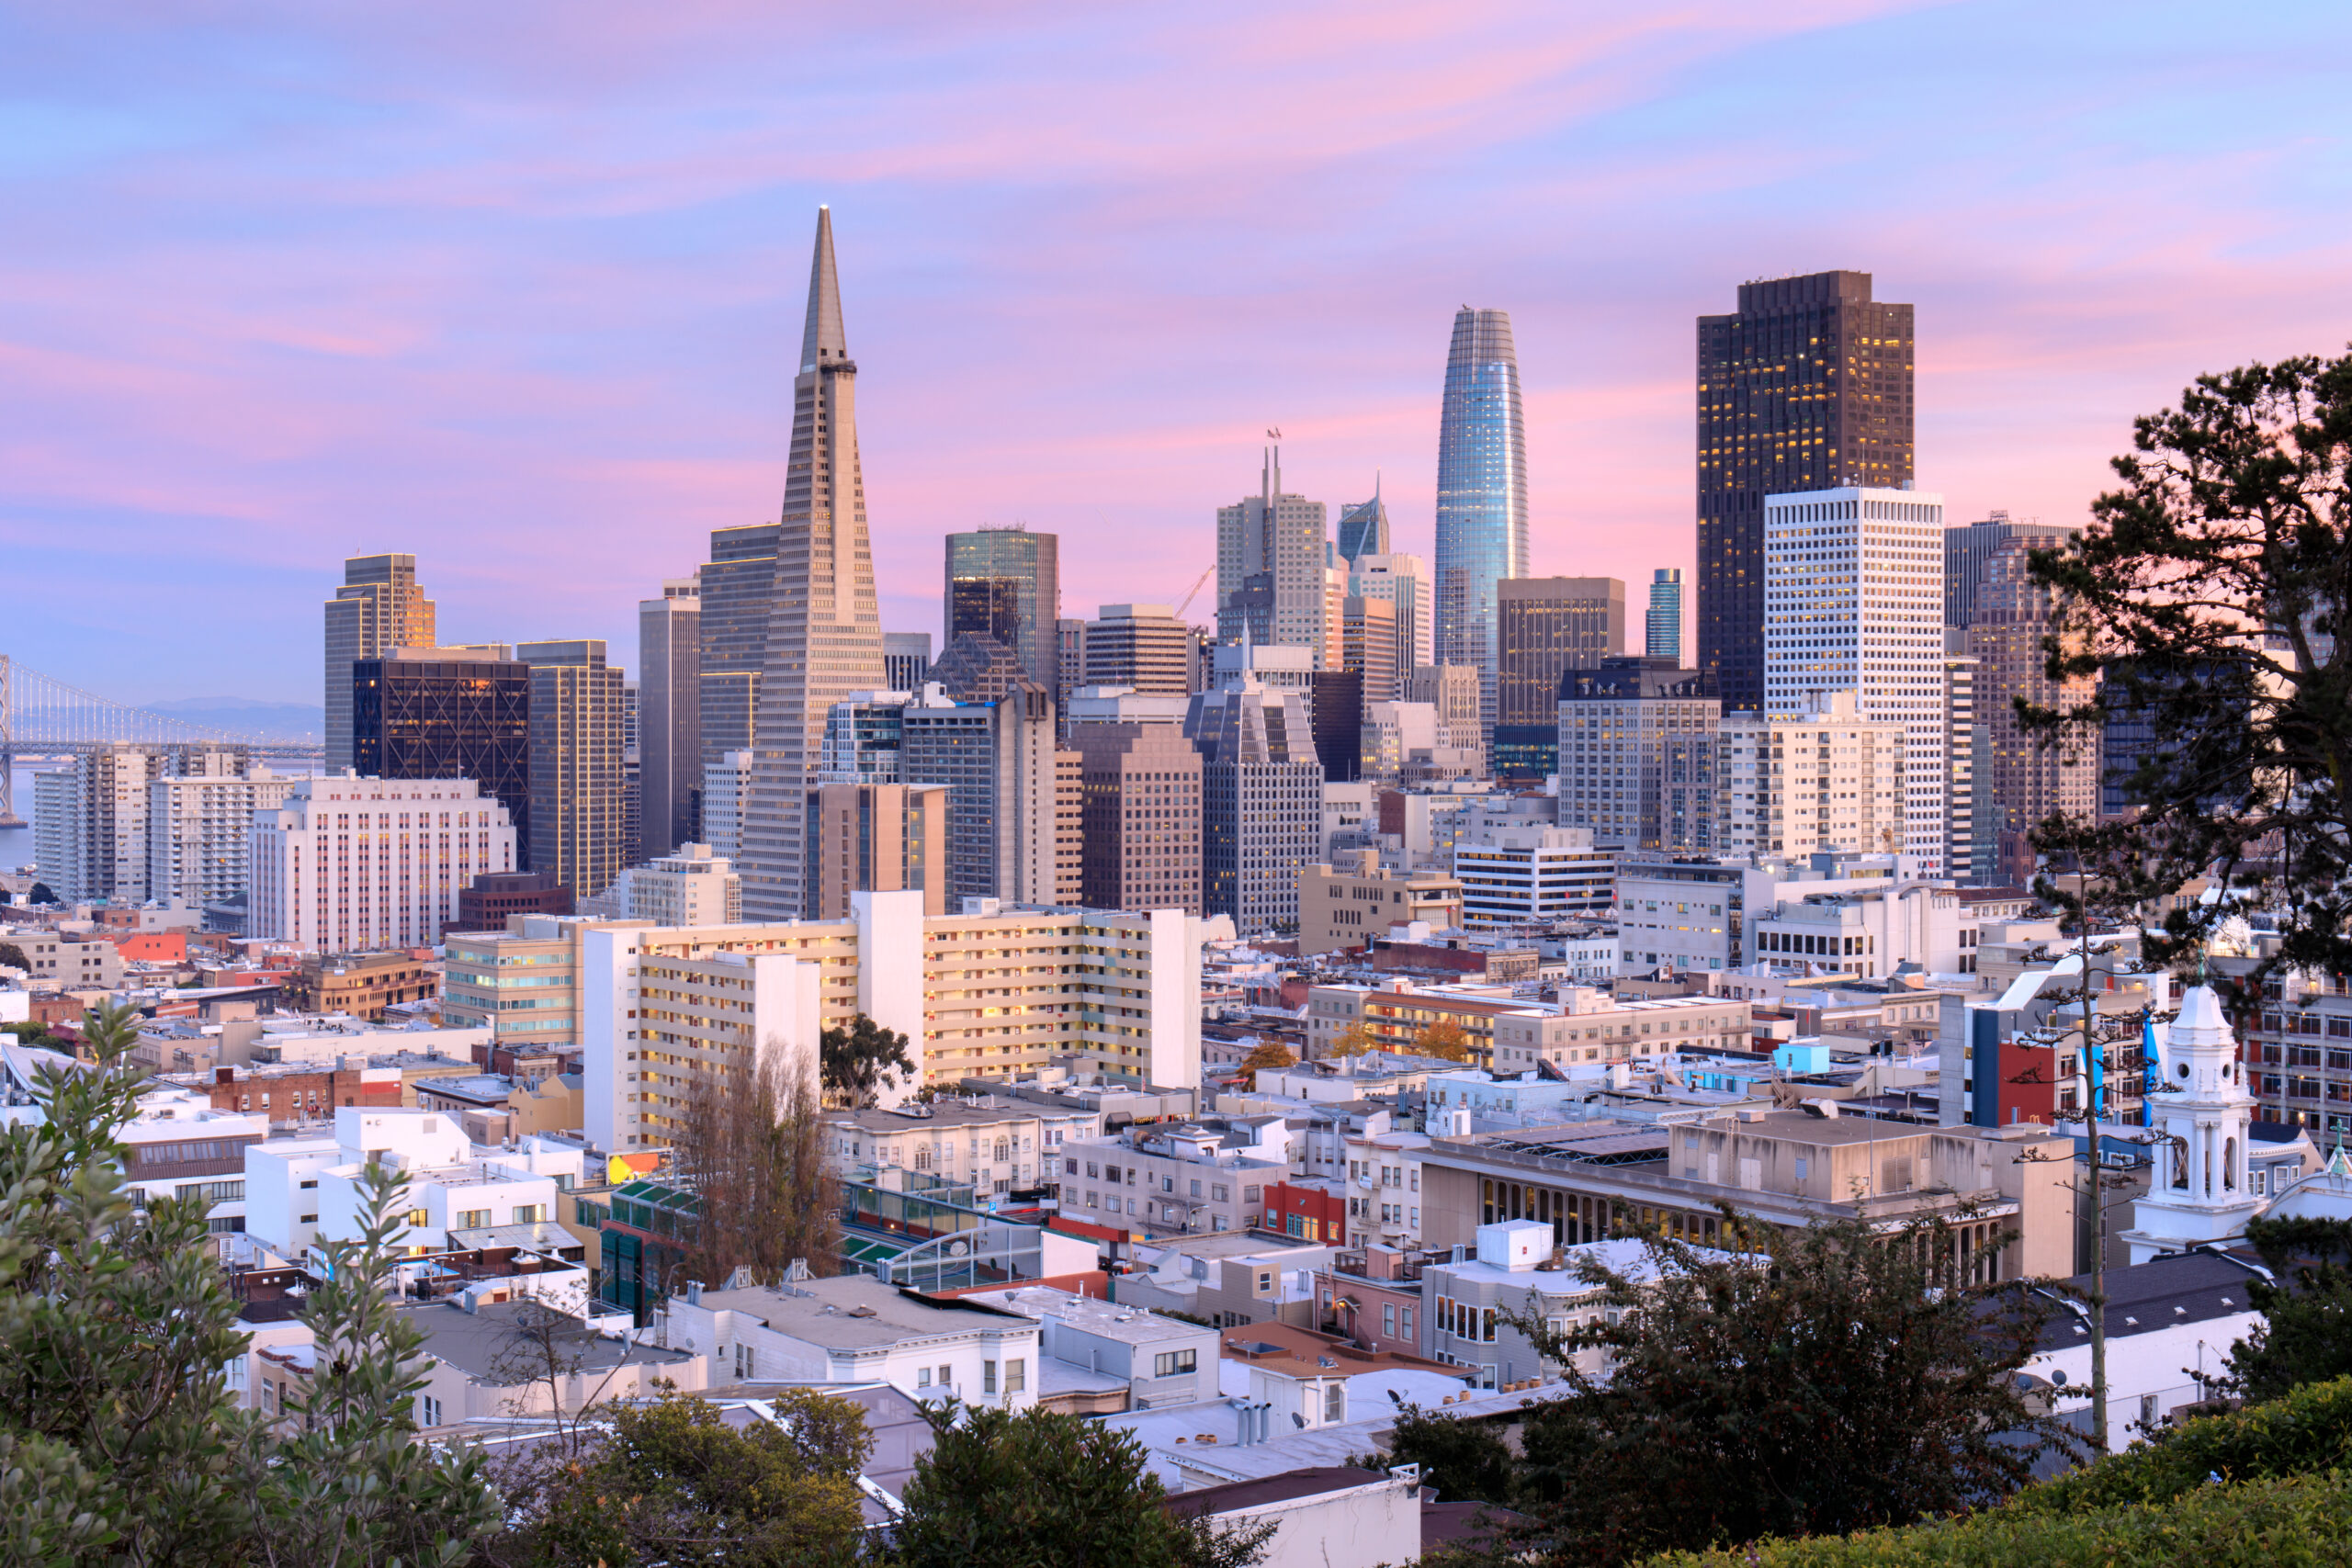 What Are The Best Spots for San Francisco Skyline Views?